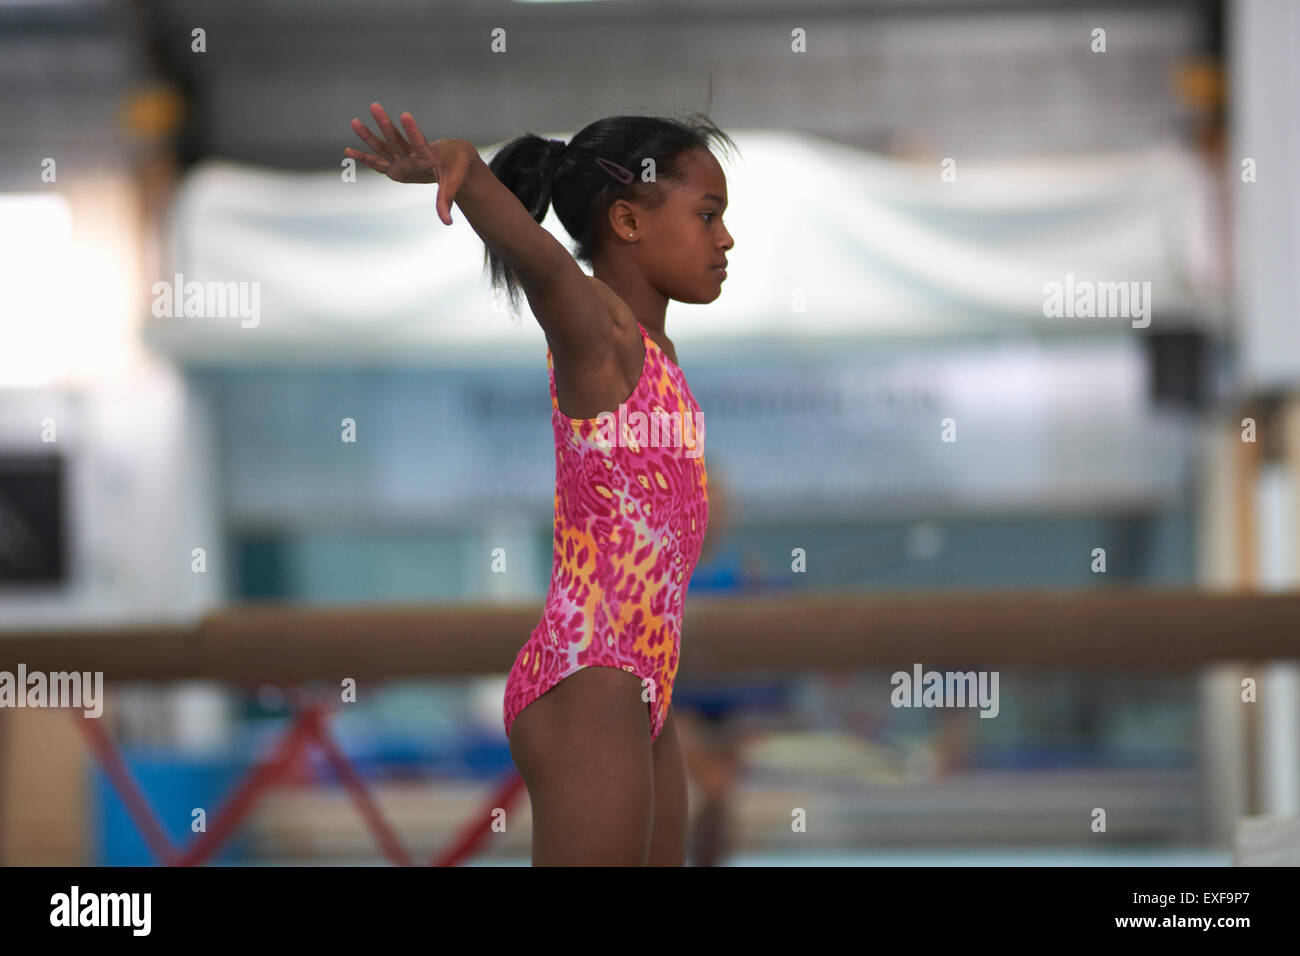 Young gymnast practising moves Stock Photo